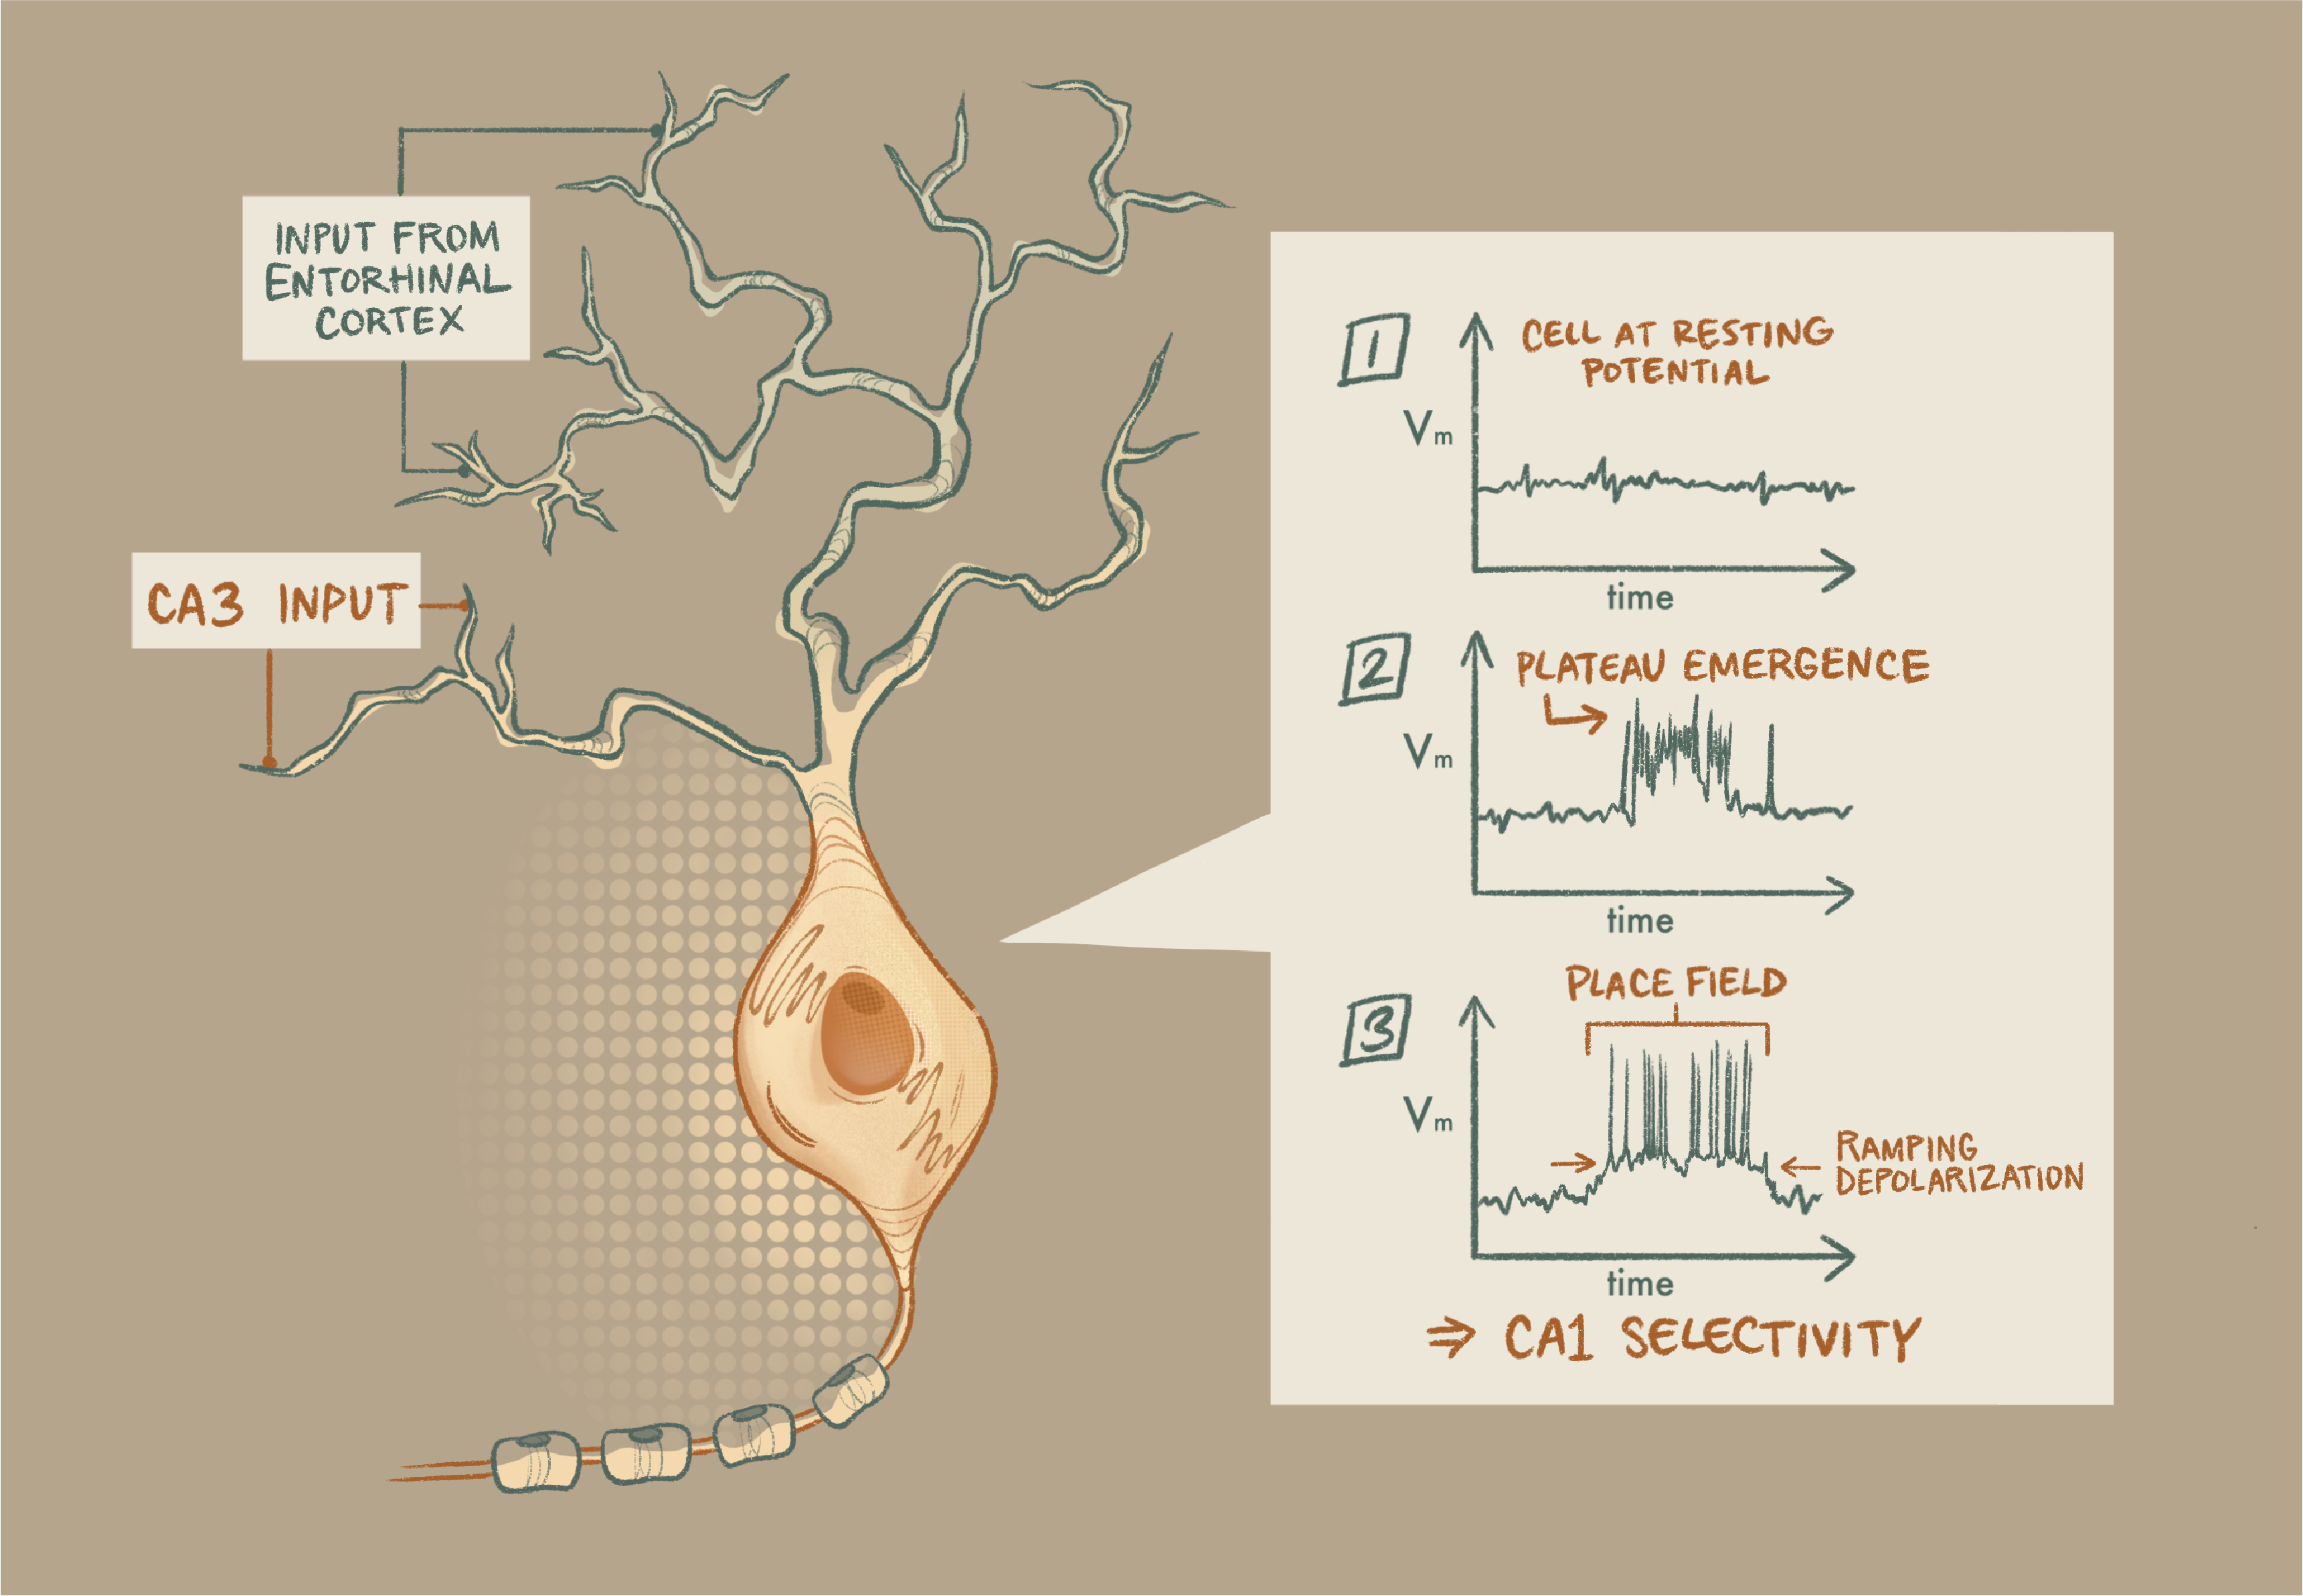 Infographic showing the plateau emergence and ramping depolarization that enables the development of place fields in CA1 neurons.